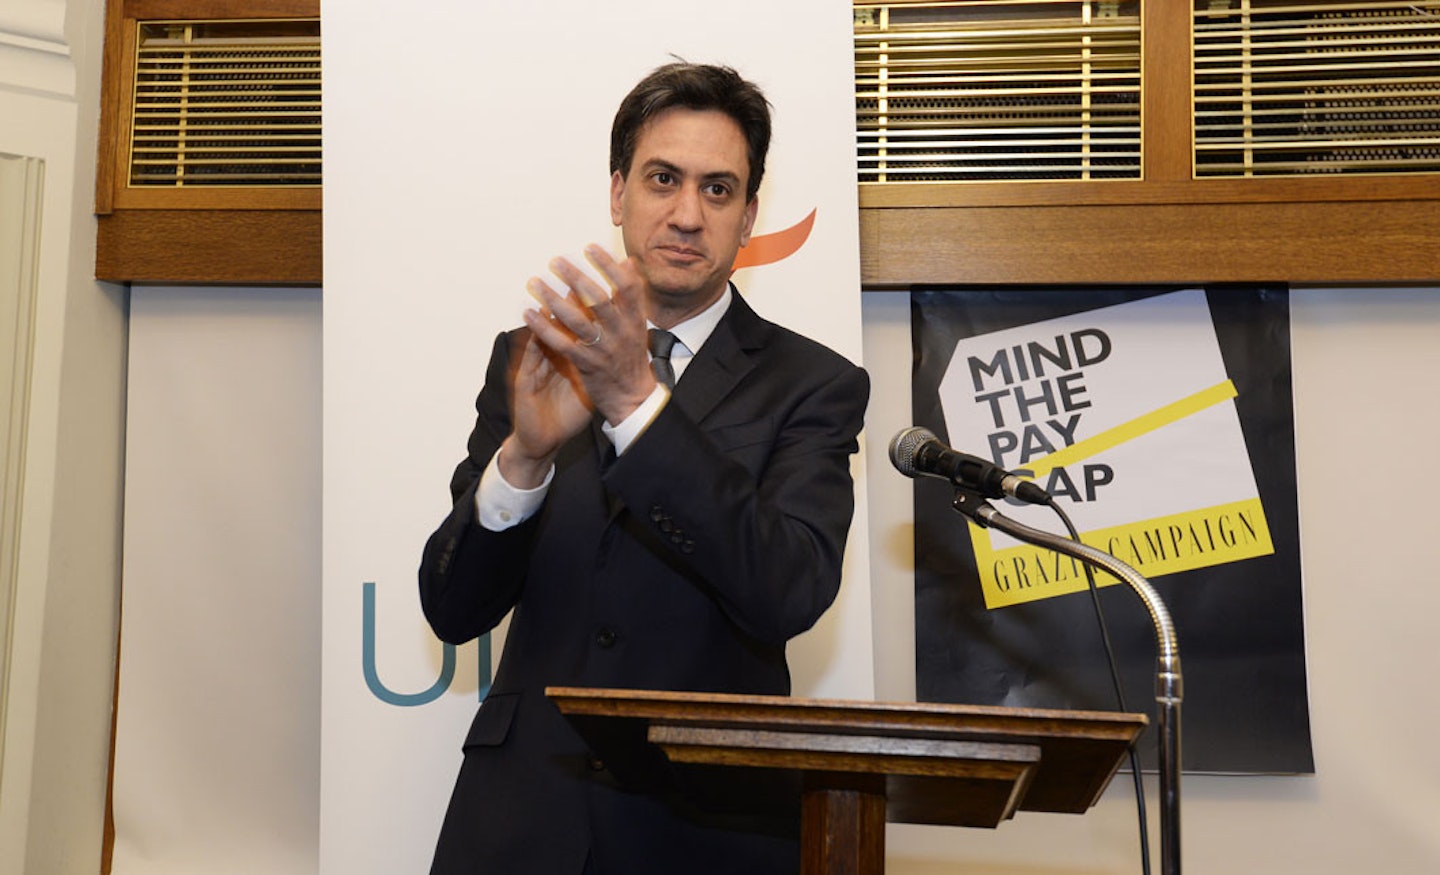 Ed Miliband shows his support for the Mind The Pay Gap campaign [Pic: Getty]